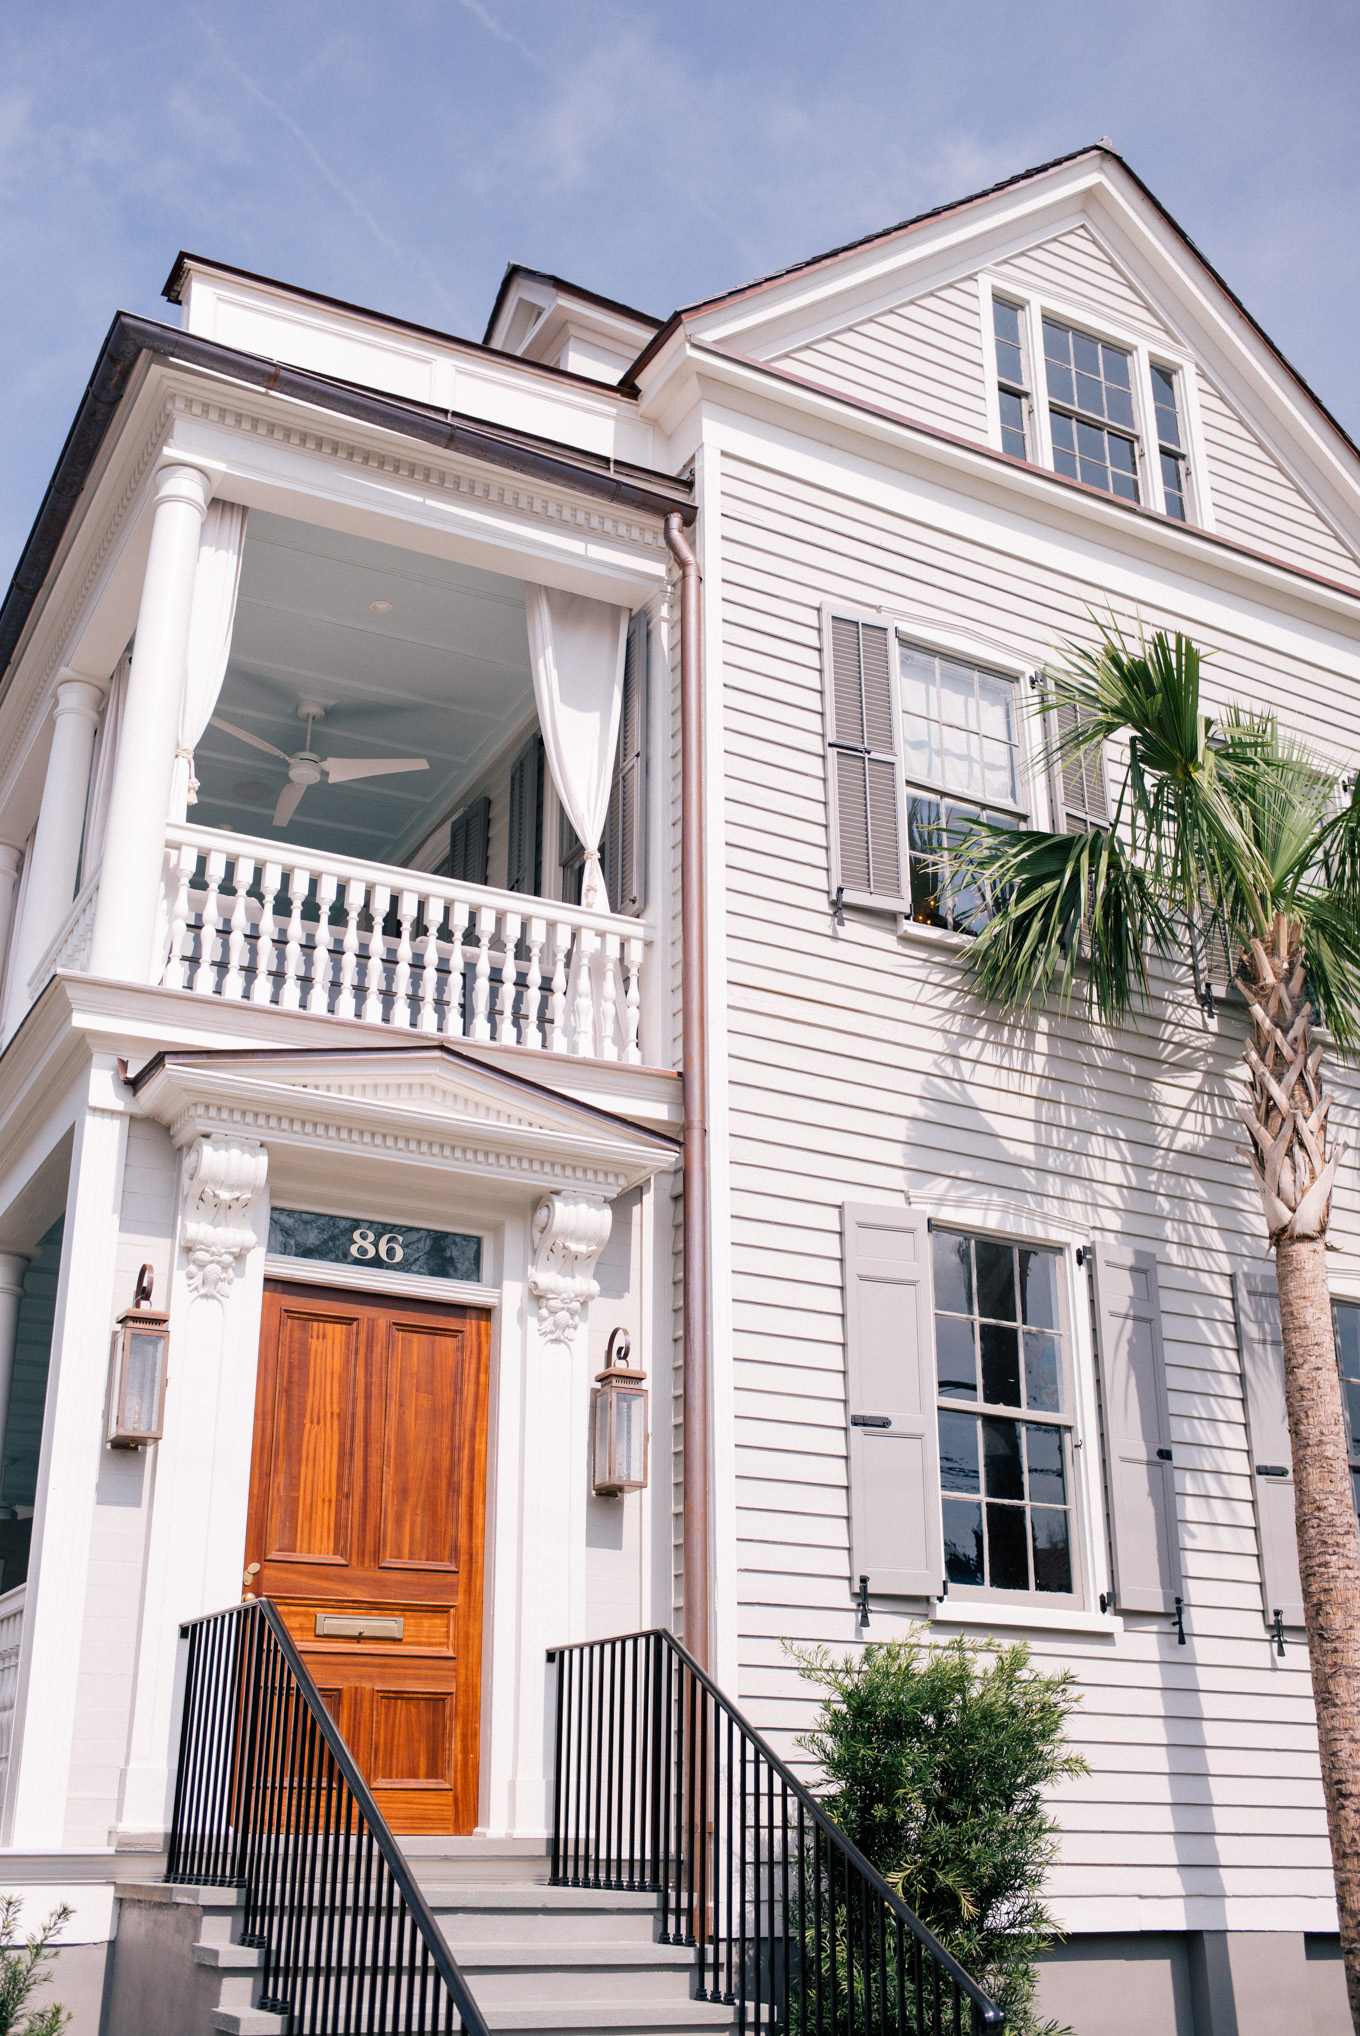 Charleston Itinerary where to stay 86 cannon